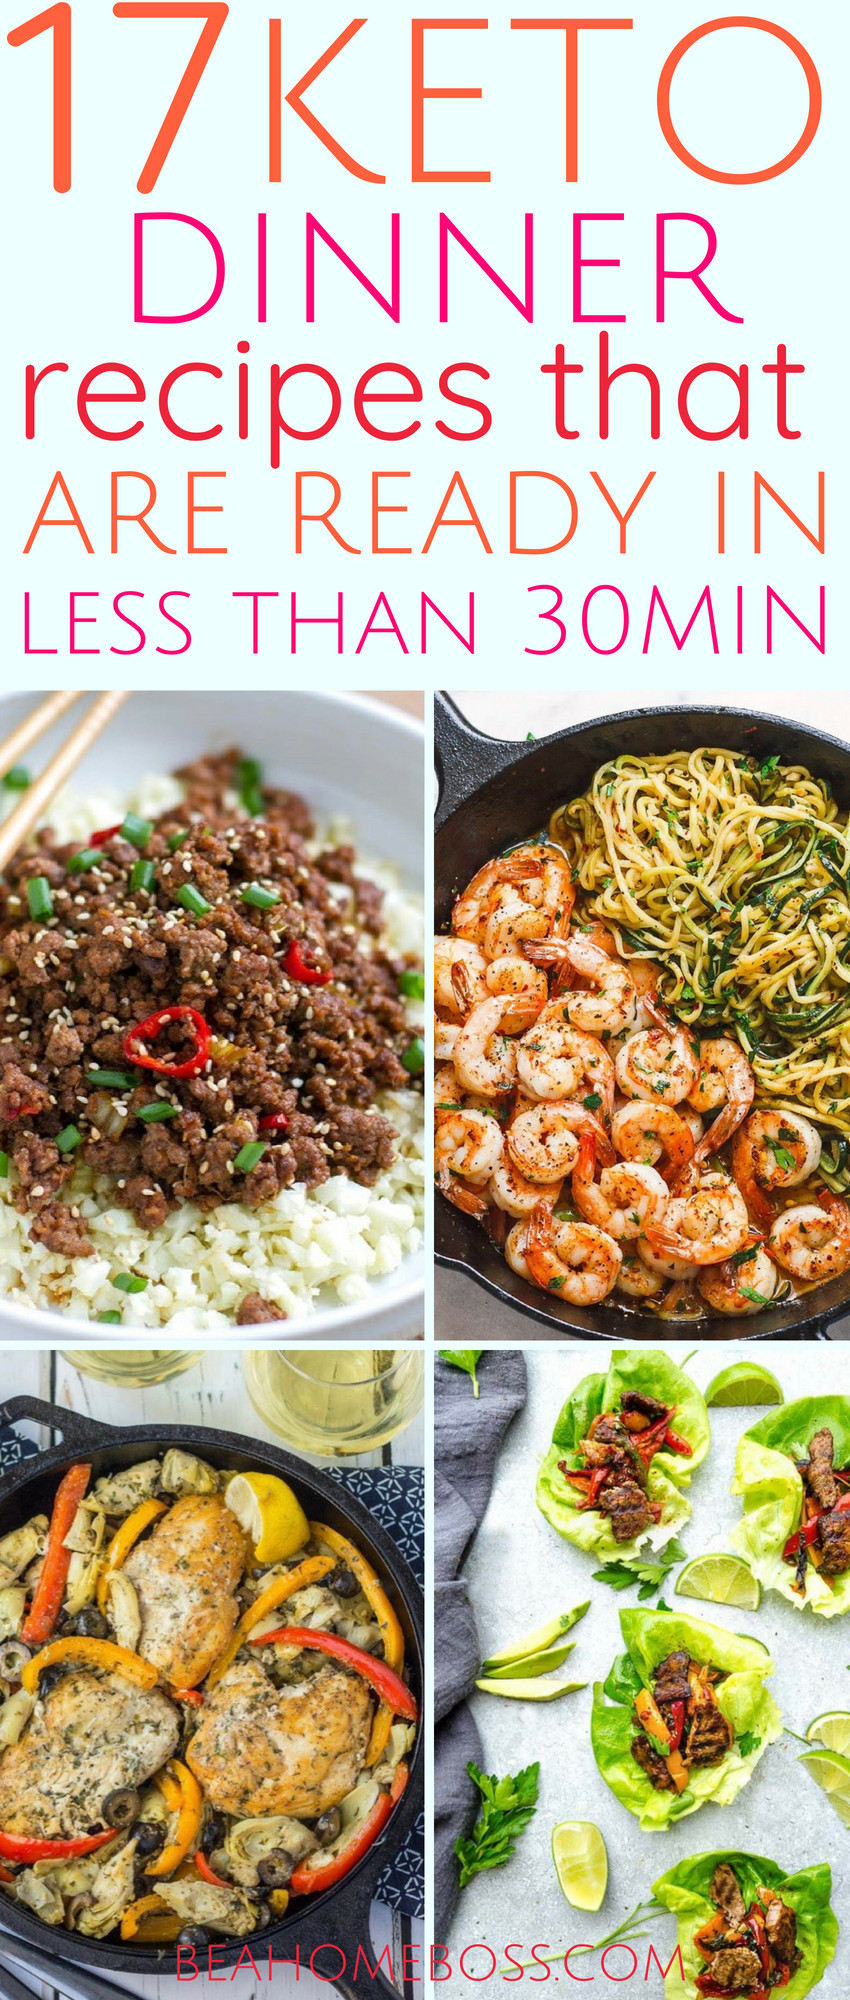 Keto Dinner Party Menu Ideas
 50 Keto Dinner Ideas Made in 30 Minutes or Less Updated